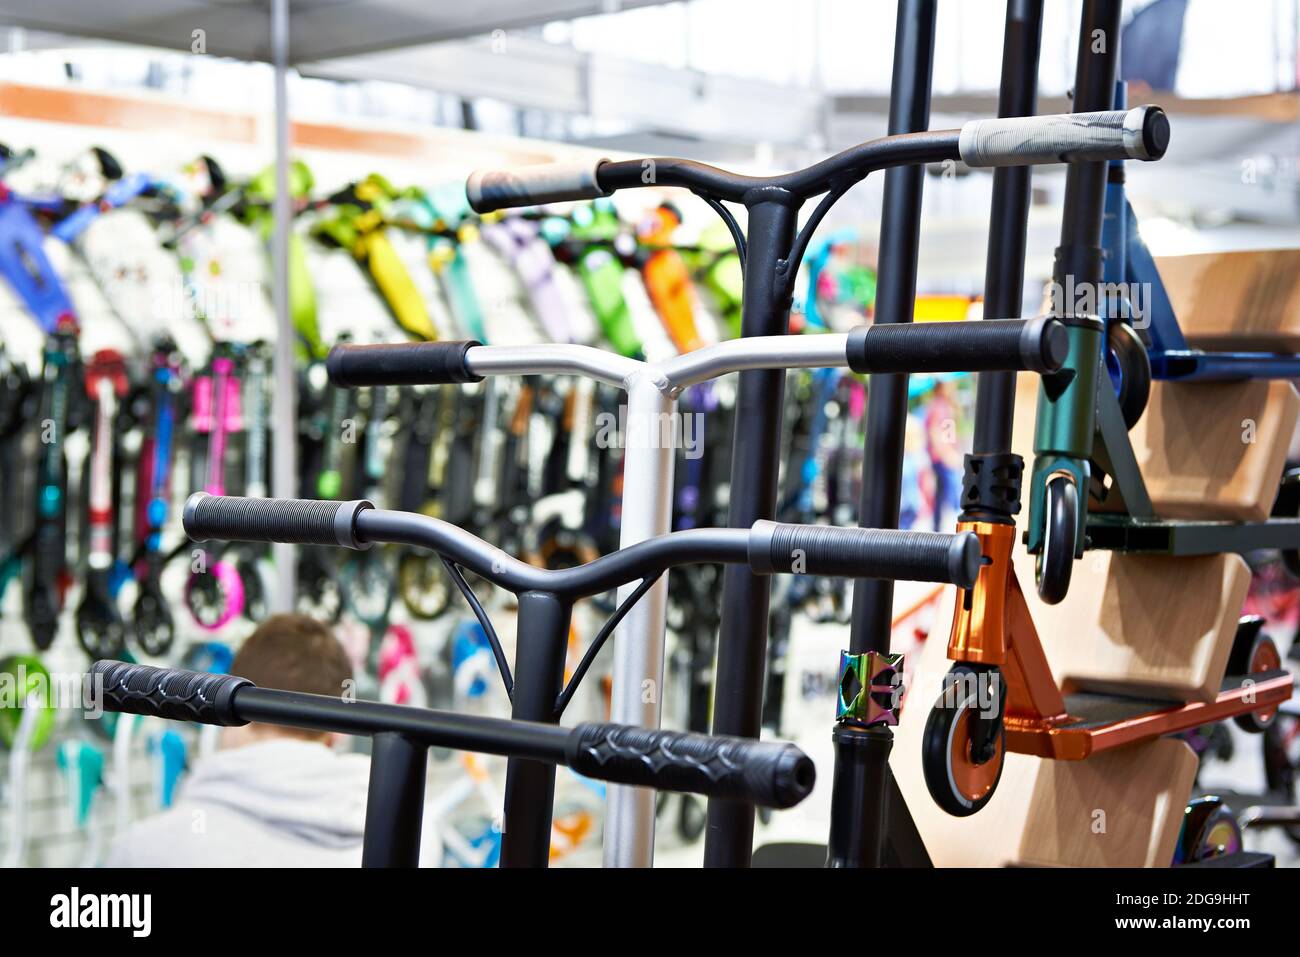 Handlebars of scooters in the store Stock Photo